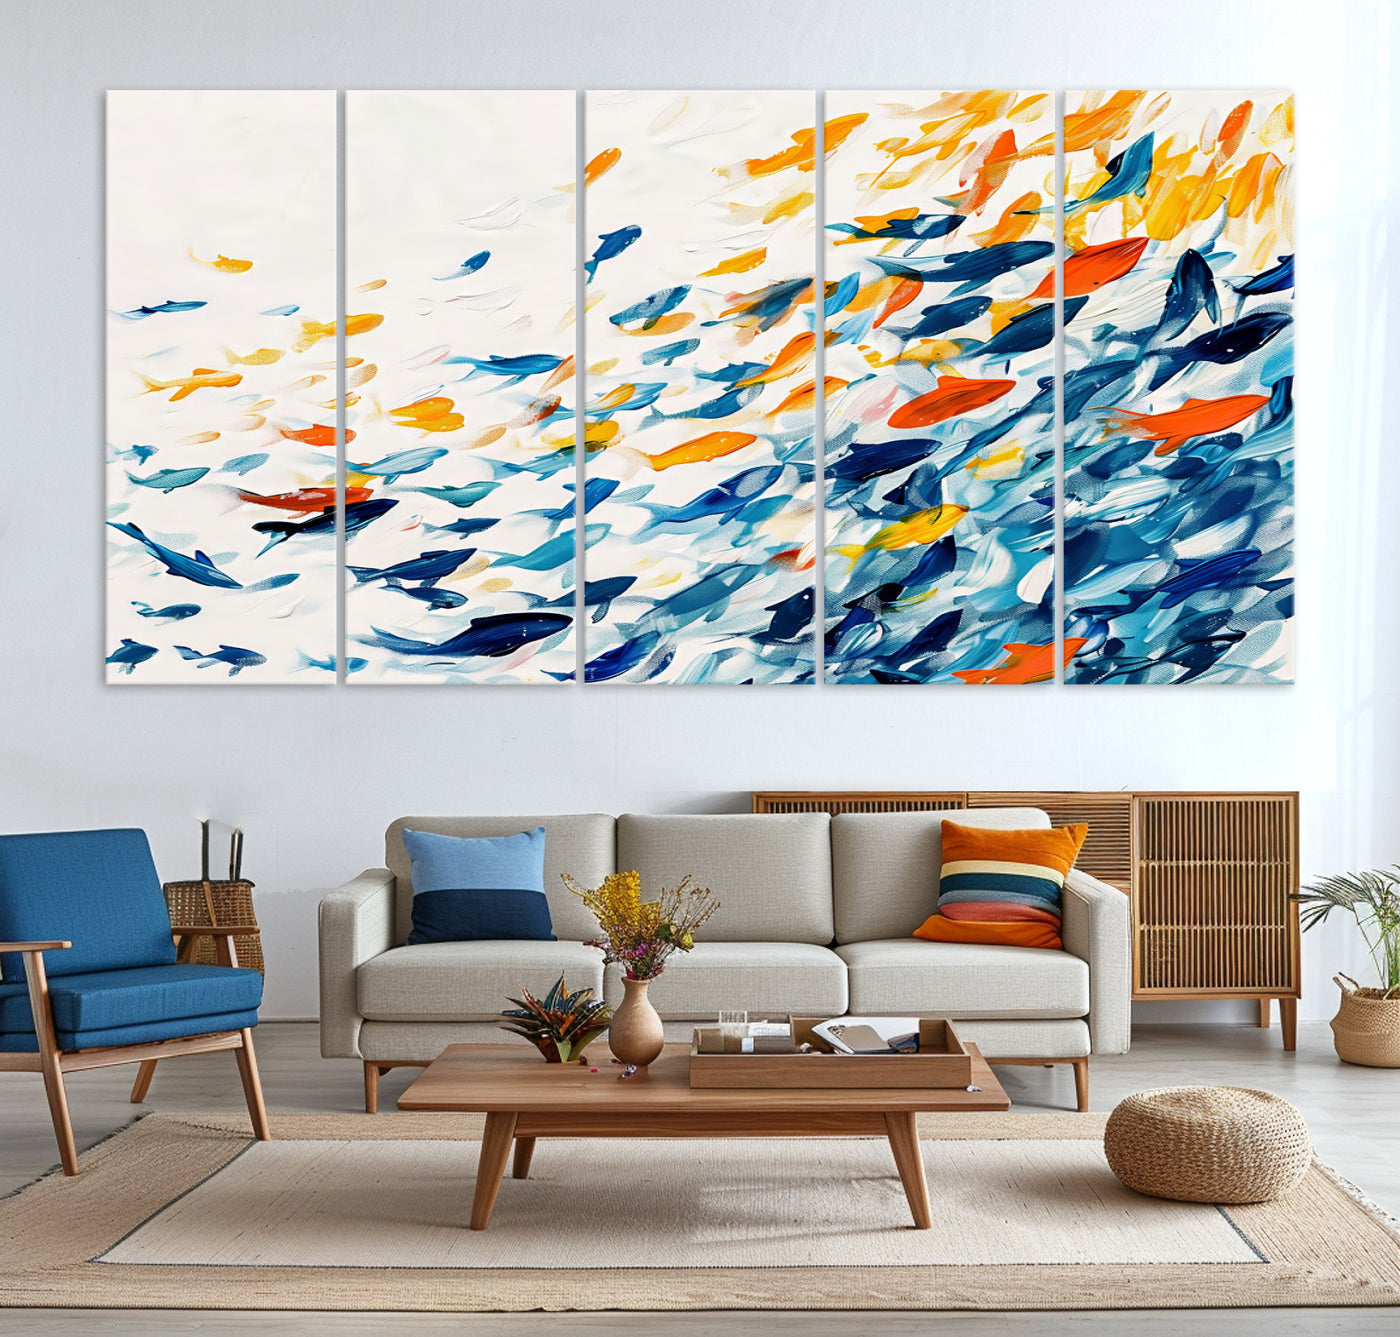 Abstract Fish Shoal Wall Art Canvas Print, Colorful Fish Herd Painting on Canvas Print